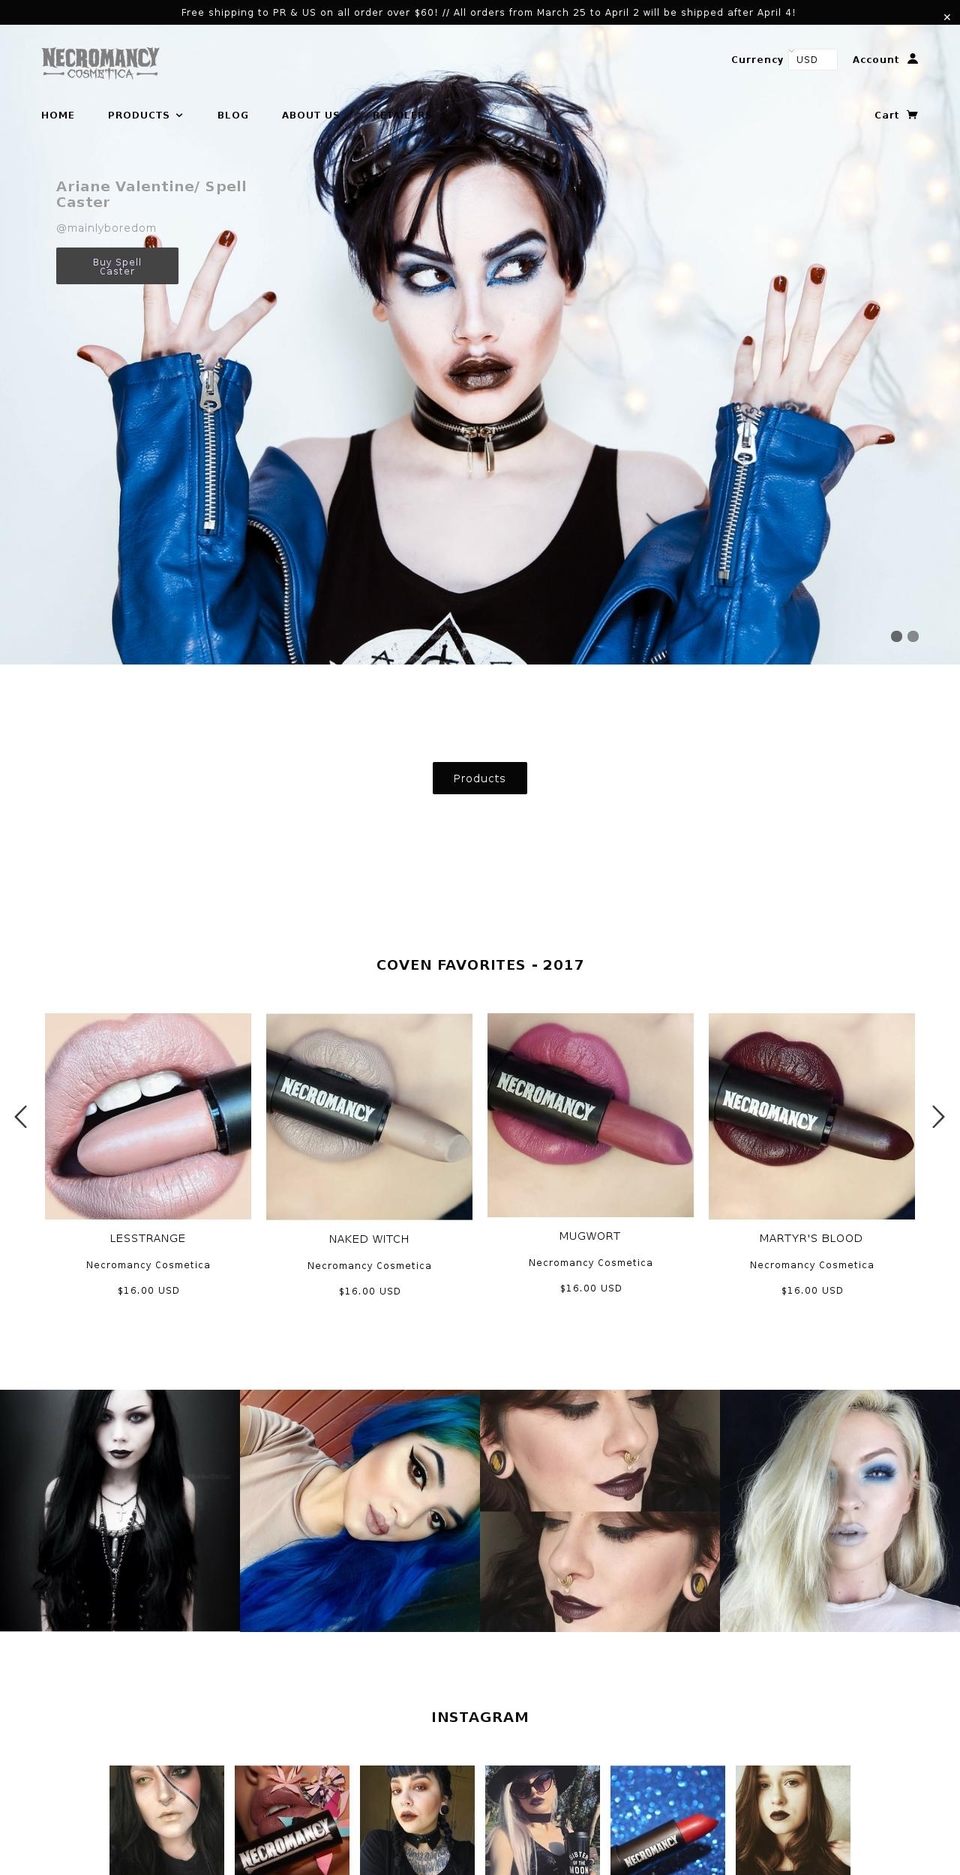 Be Yours Shopify theme site example necromancycosmetica.com